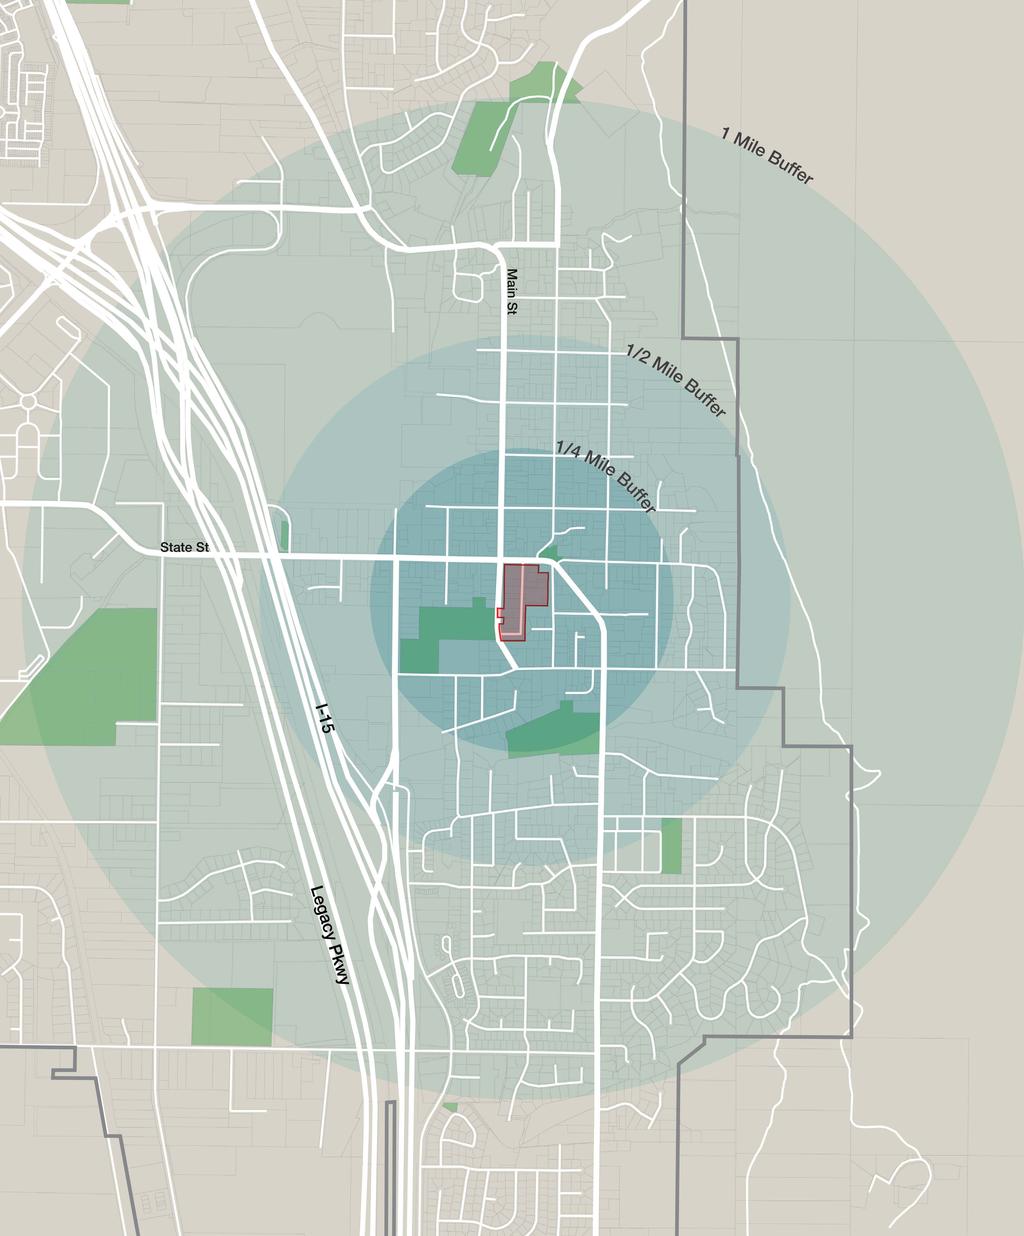 The three concentric circles around the site indicate the approximate distance these nodes and attractions are located from the Memorial Courthouse Campus site.